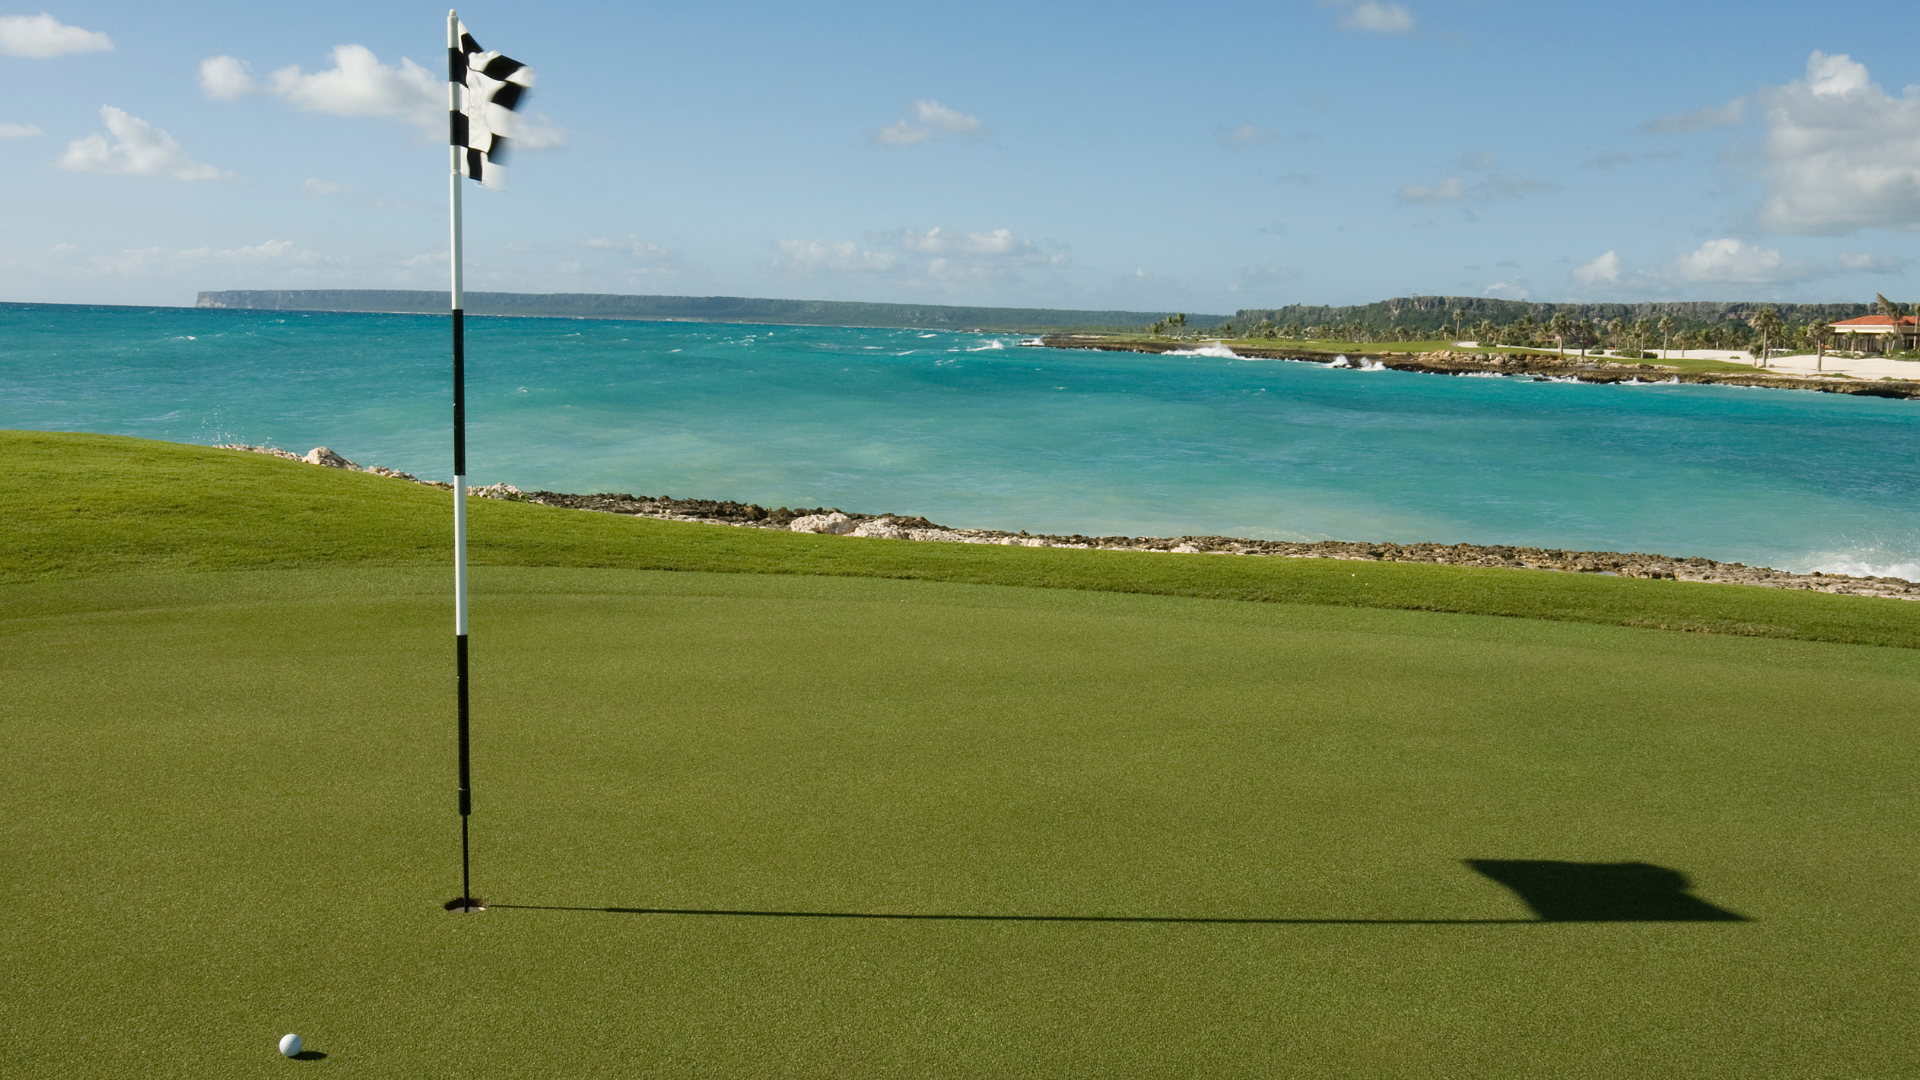 It’s all about the right shot in Punta Cana